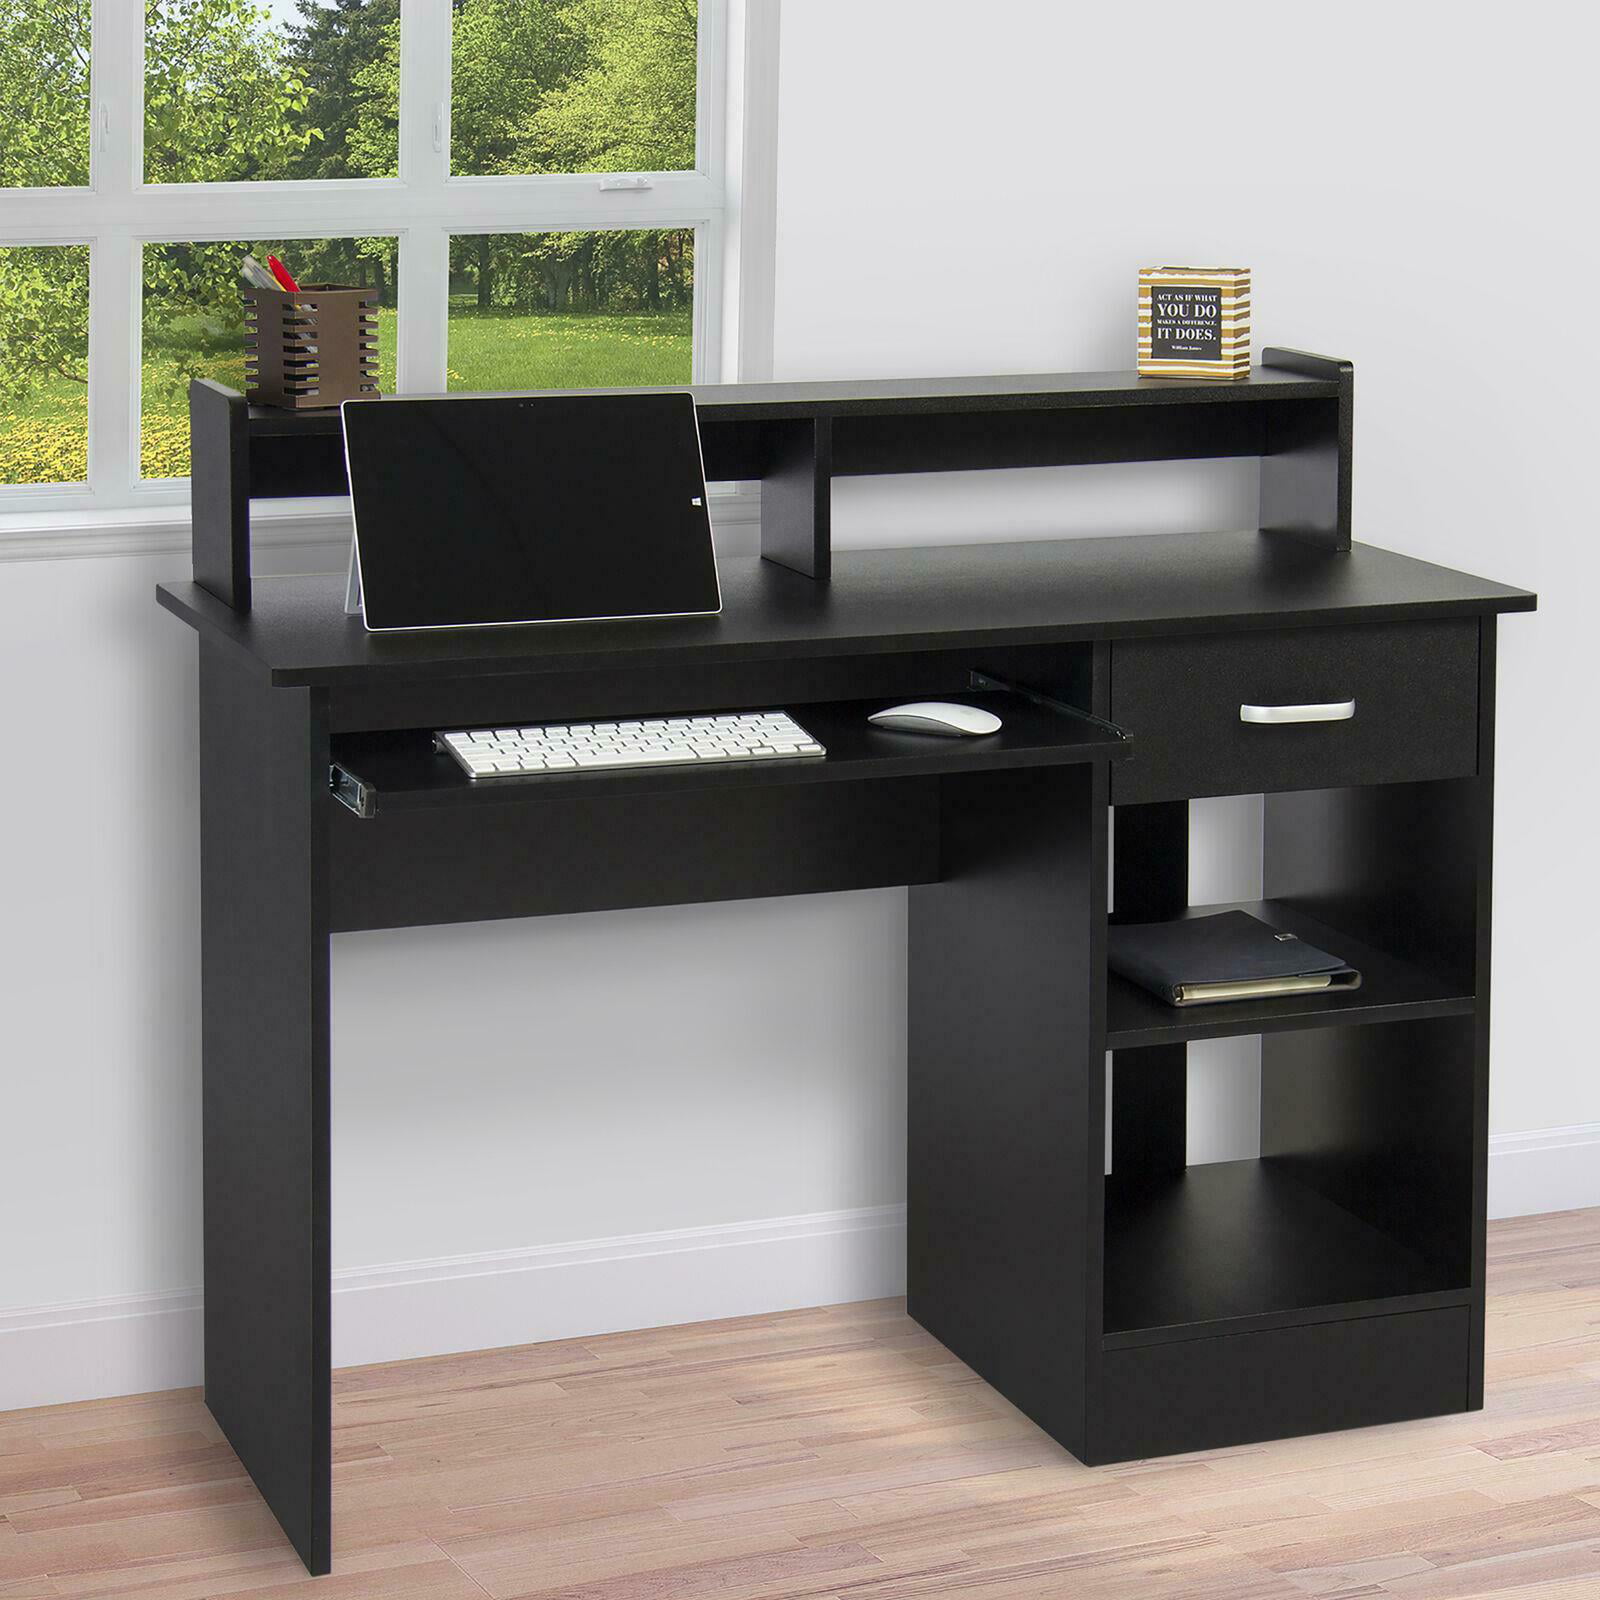 Wood Computer Desk With Drawers Shelf PC Laptop Office Table Home Small Desks BK 